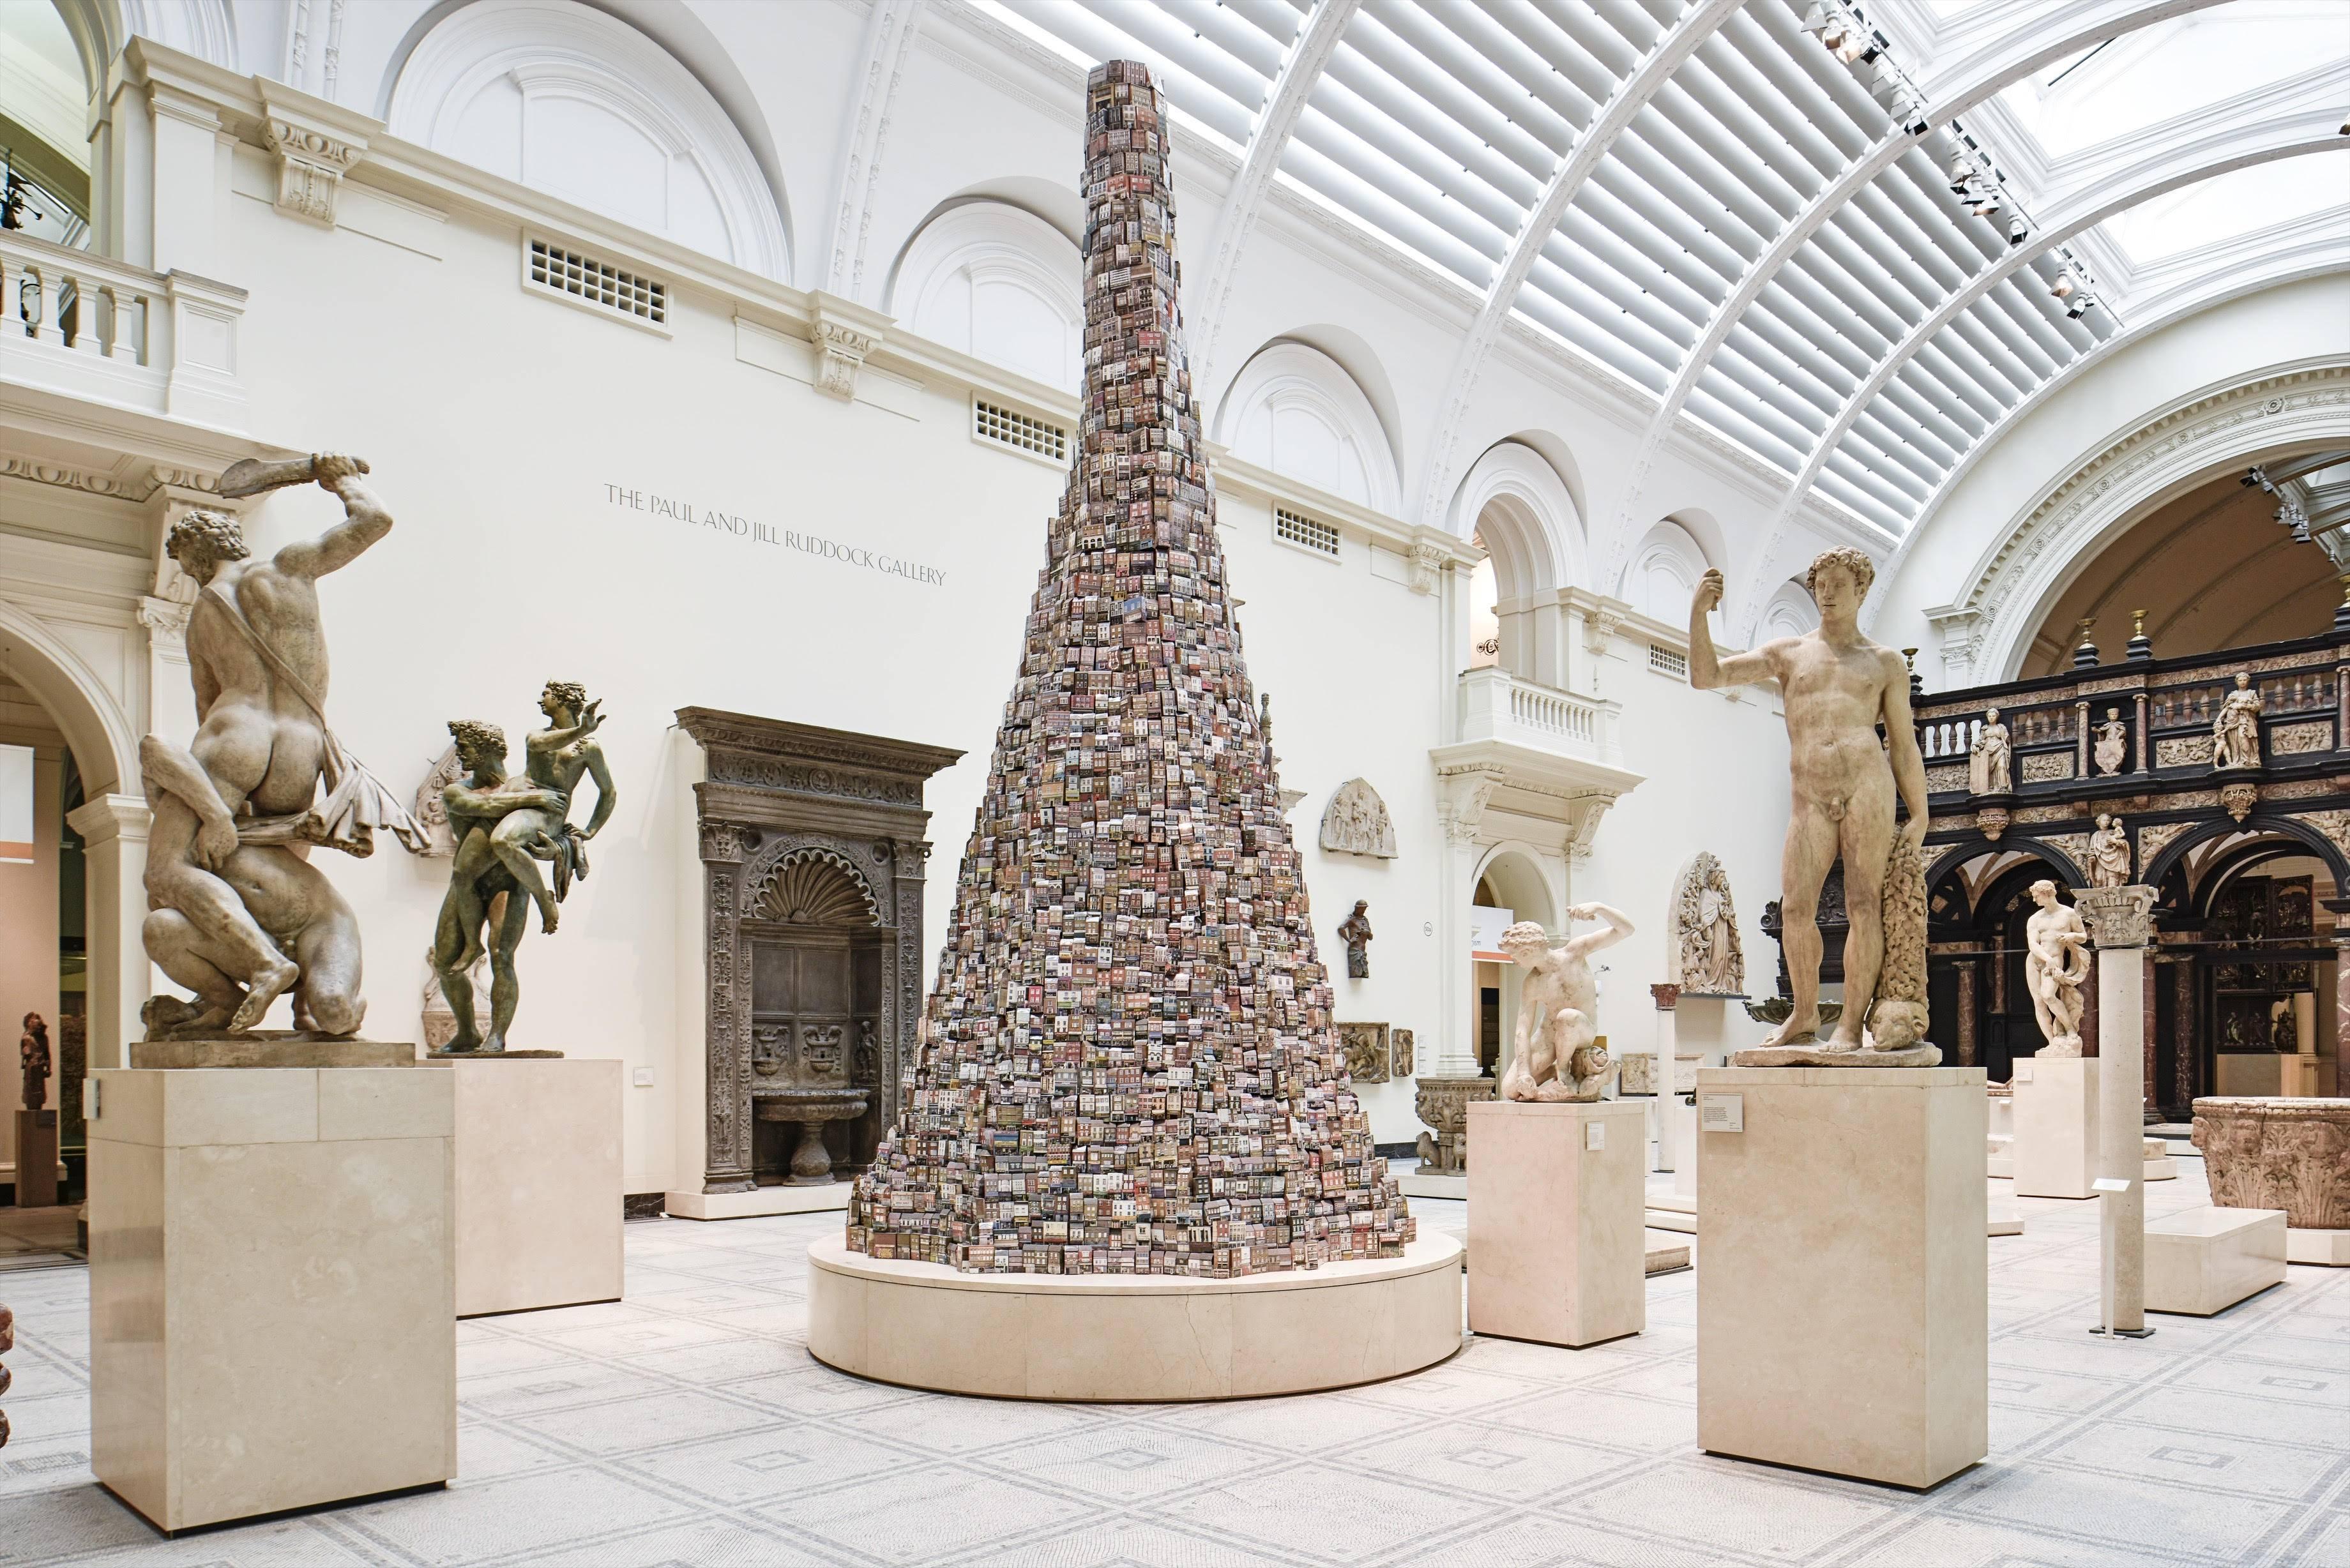 Created especially for the V&A by artist Barnaby Barford, The Tower of Babel was displayed in the V&A's Medieval & Renaissance Galleries from 8 September to 1 November 2015. The Tower of Babel is Barnaby Barford's representation of